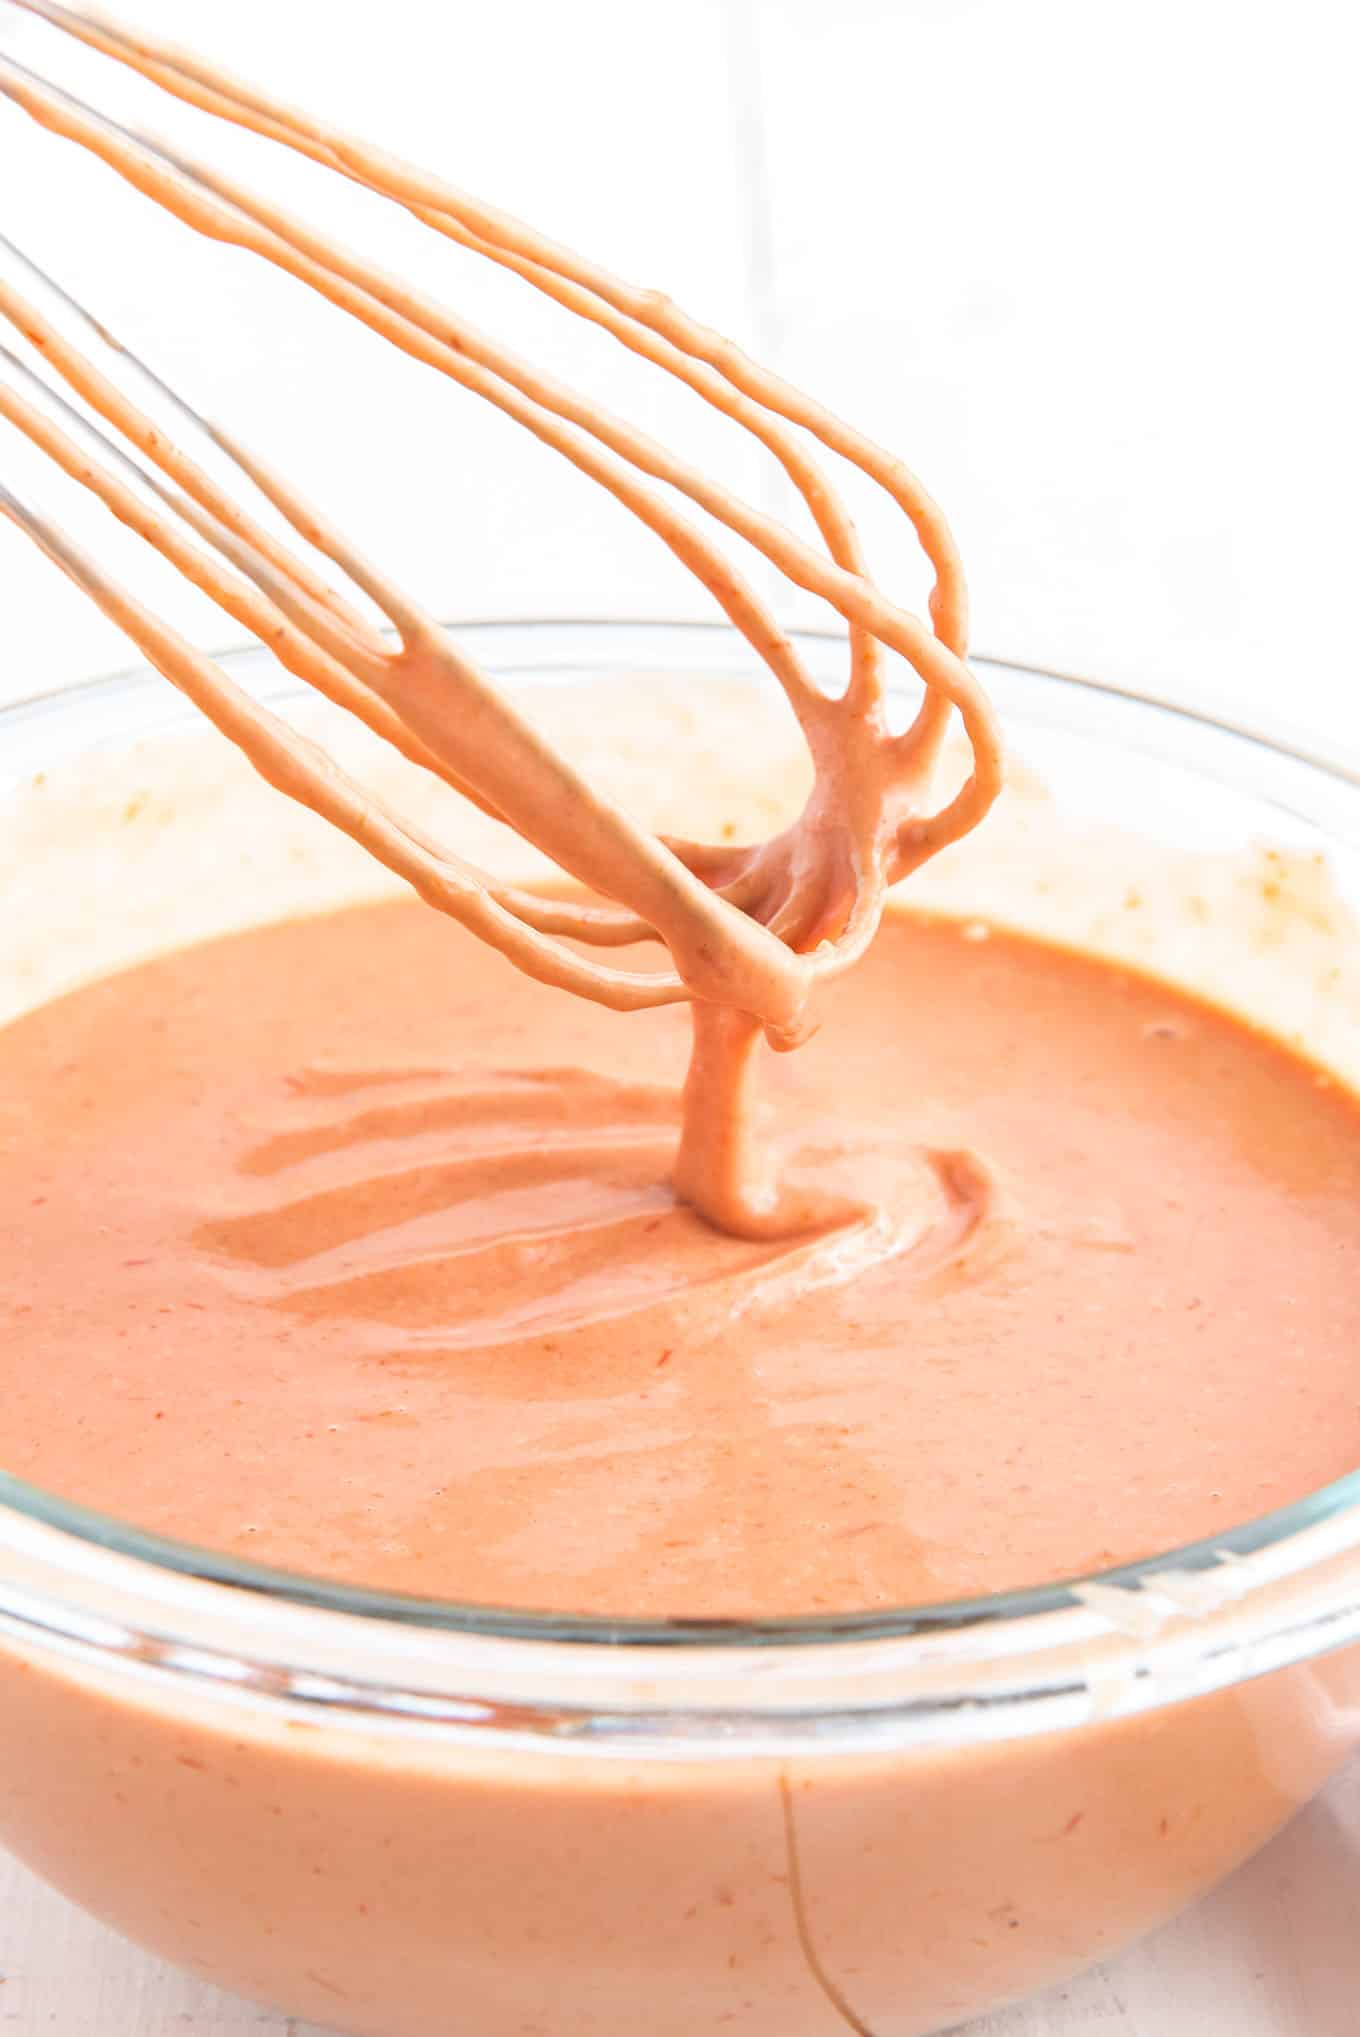 A whisk held up over the bowl of french fry dipping sauce.